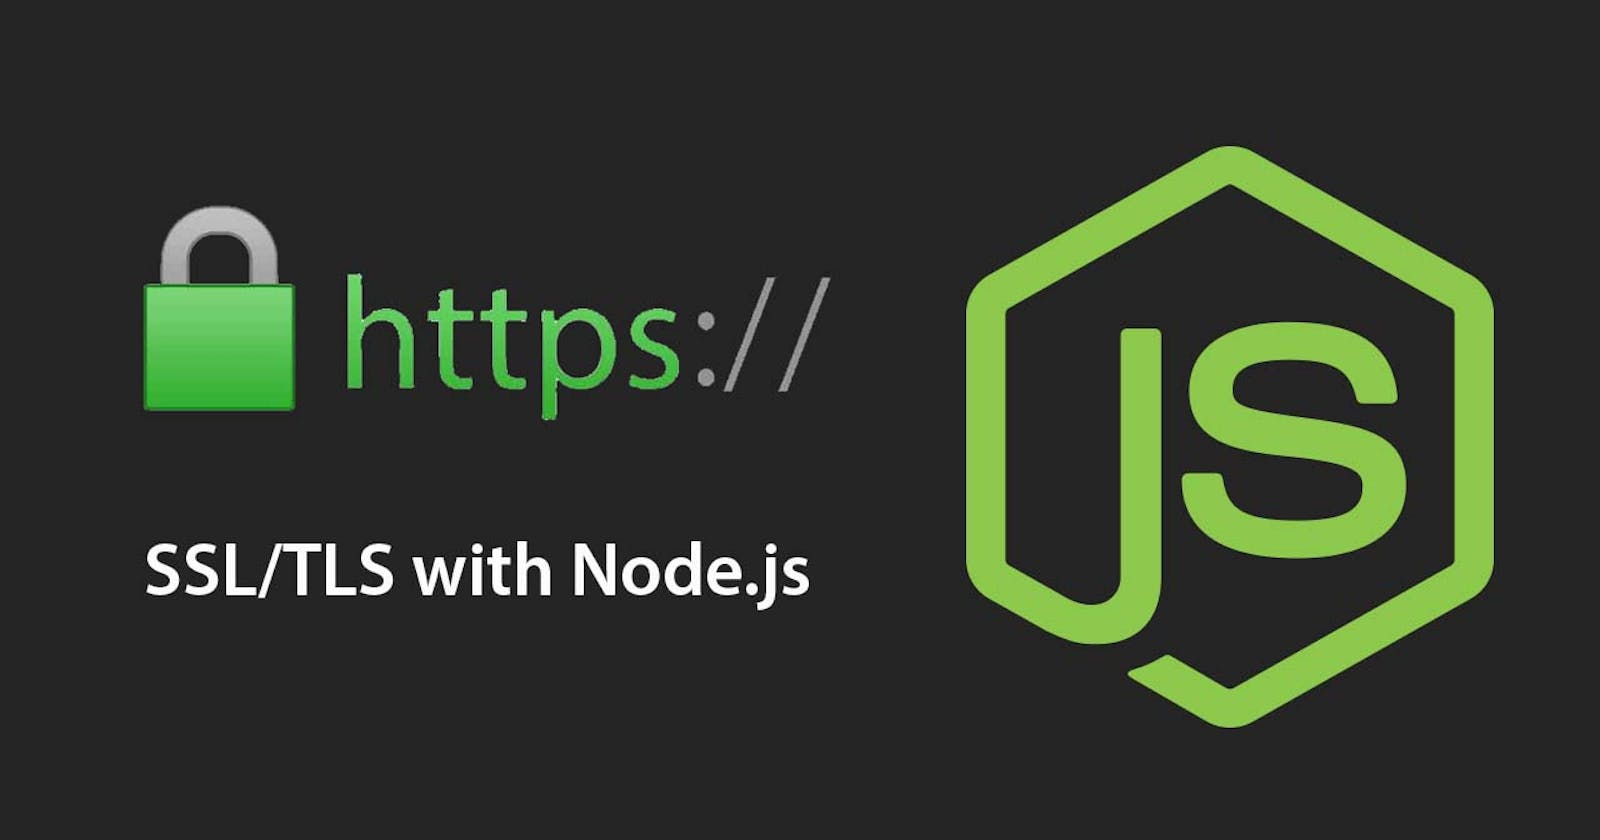 How to generate and use an SSL certificate in NodeJS